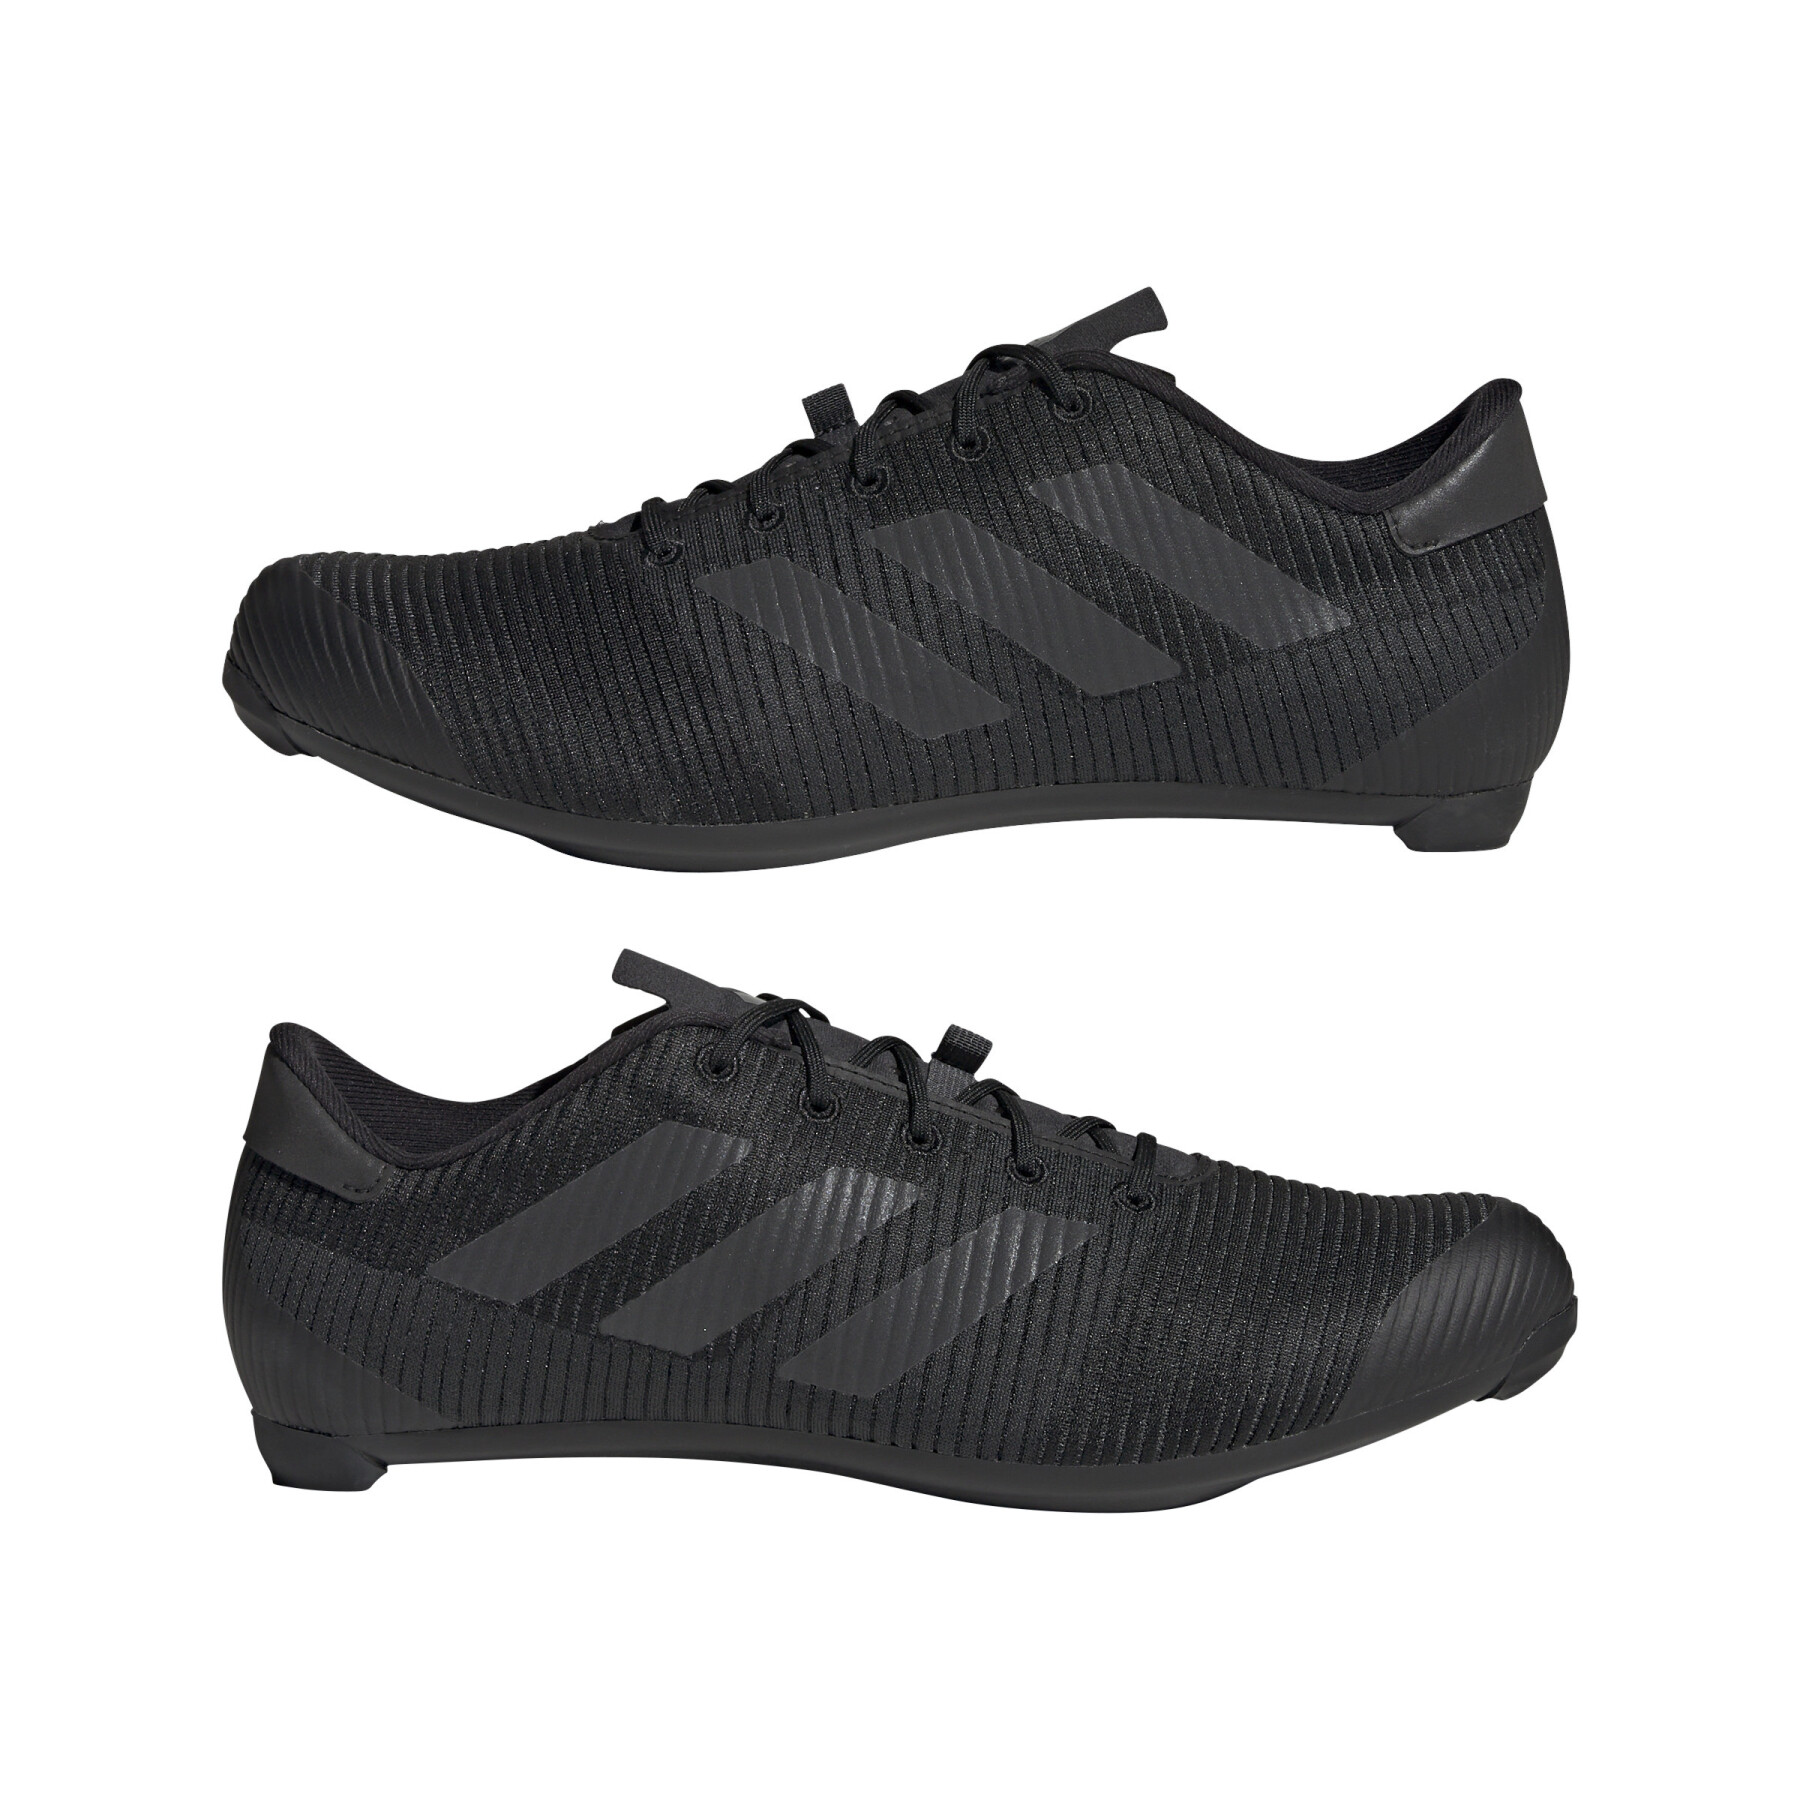 Children's cycling shoes adidas The Road 2.0